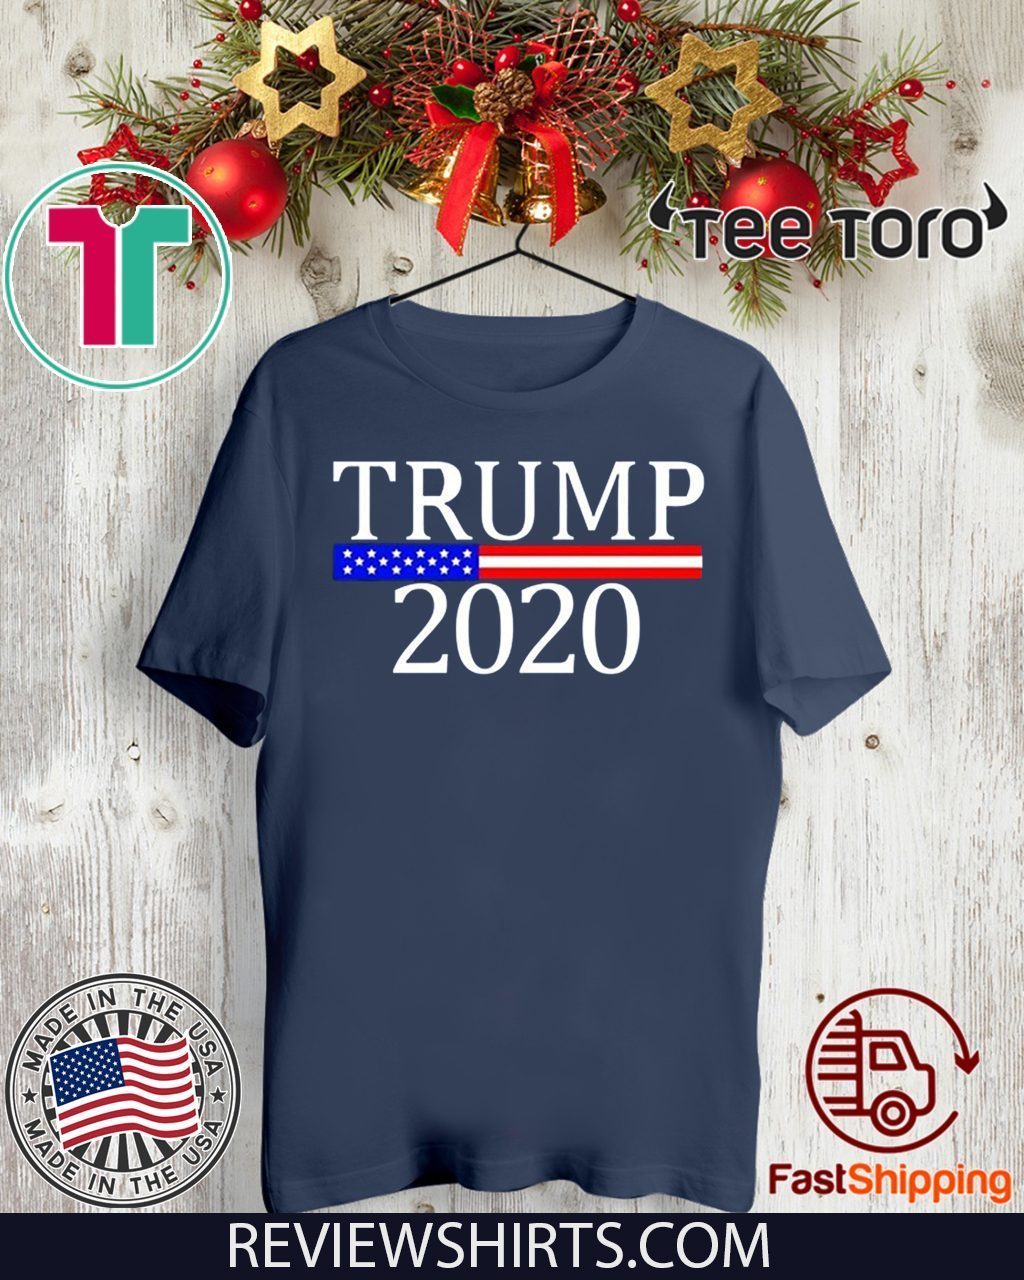 Donald Trump for President 2020 Election For T-Shirt - ReviewsTees